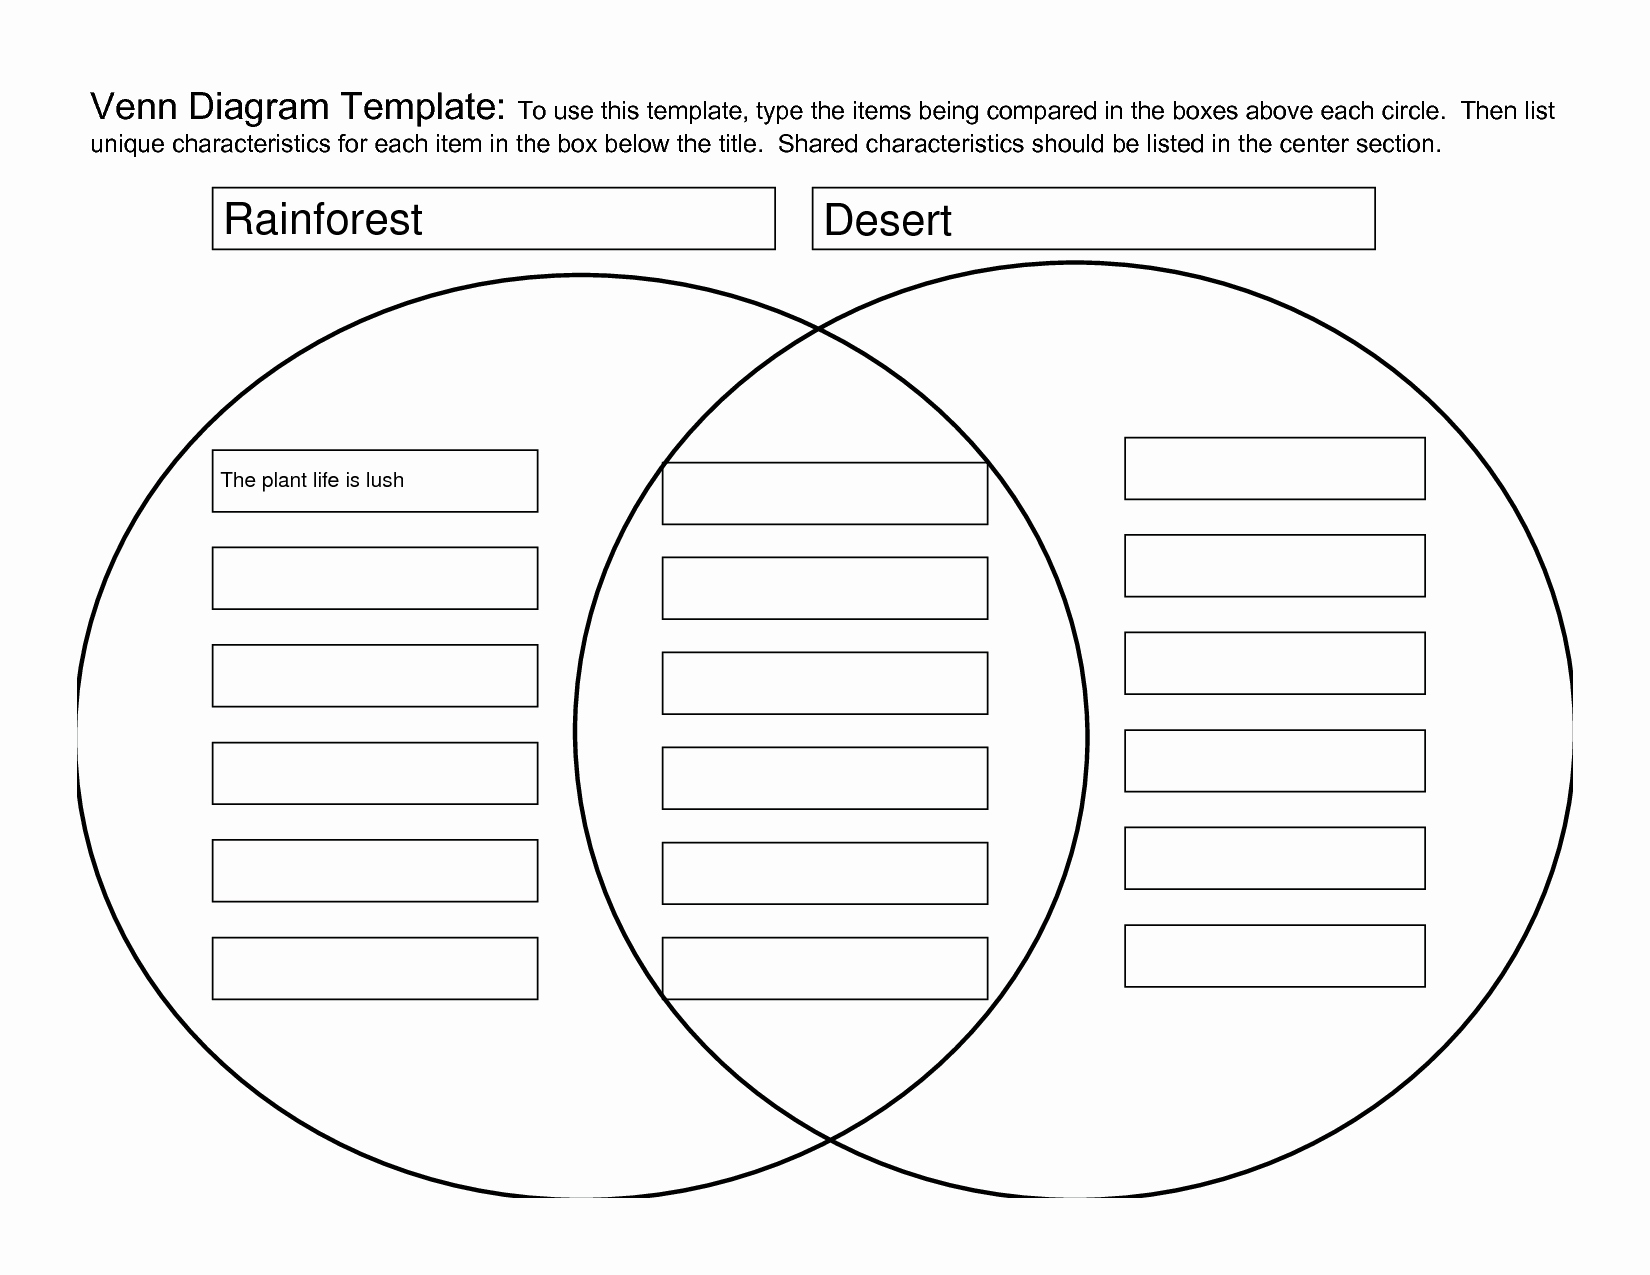 Printable Venn Diagram with Lines Best Of 29 Of Venn Diagram with Lines Template